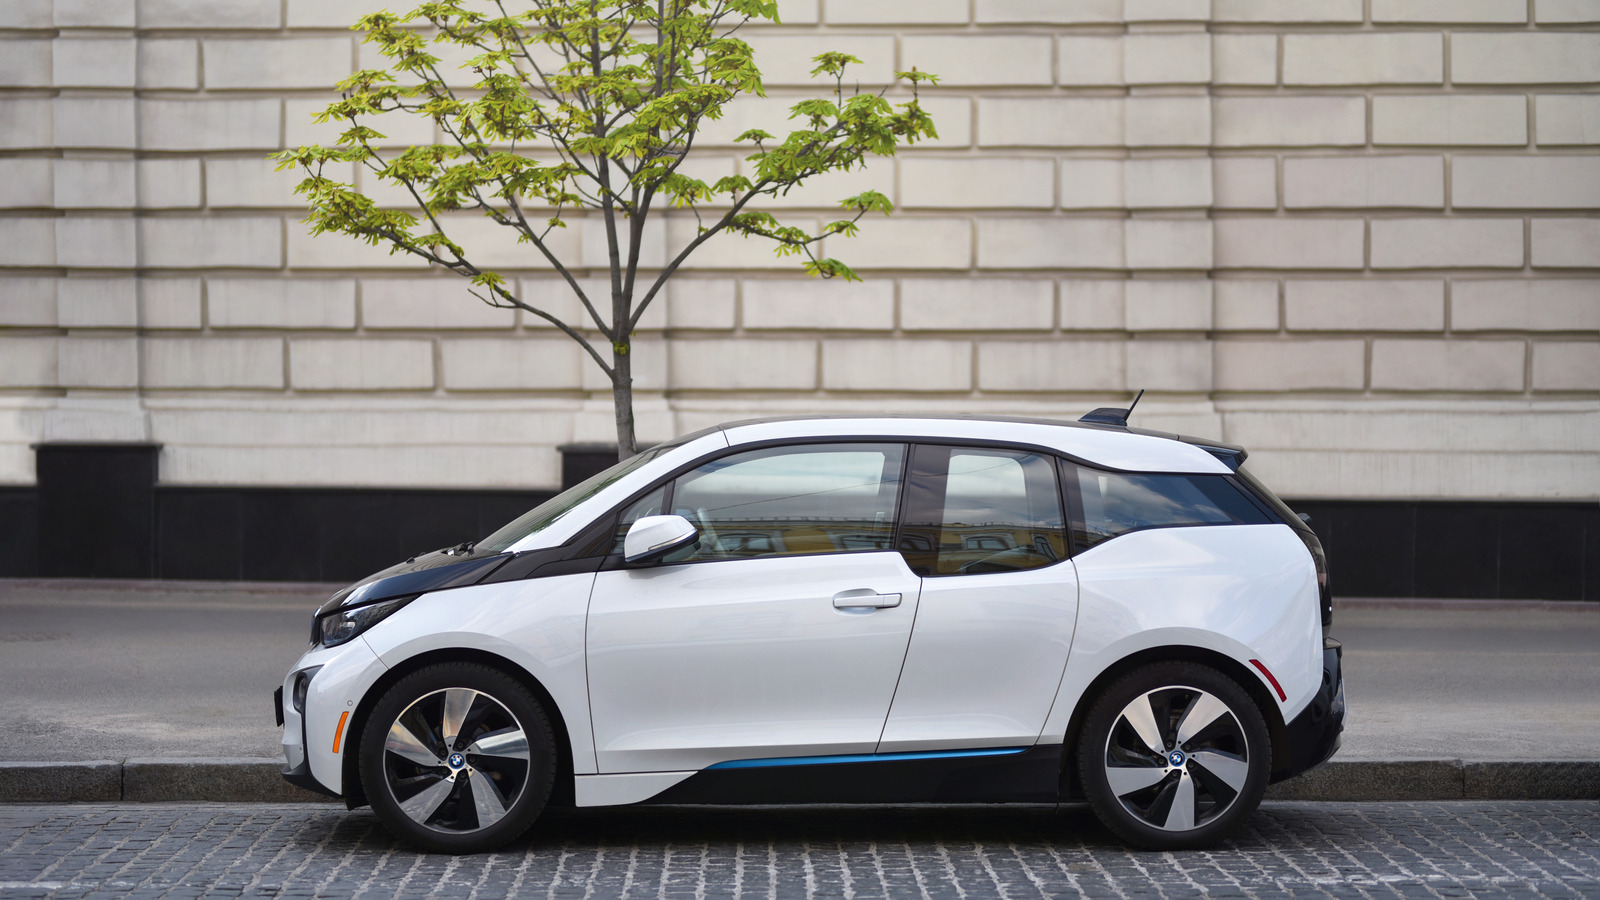 Customers Are Modding Their BMW I3 For More Range And It's Not Very Safe